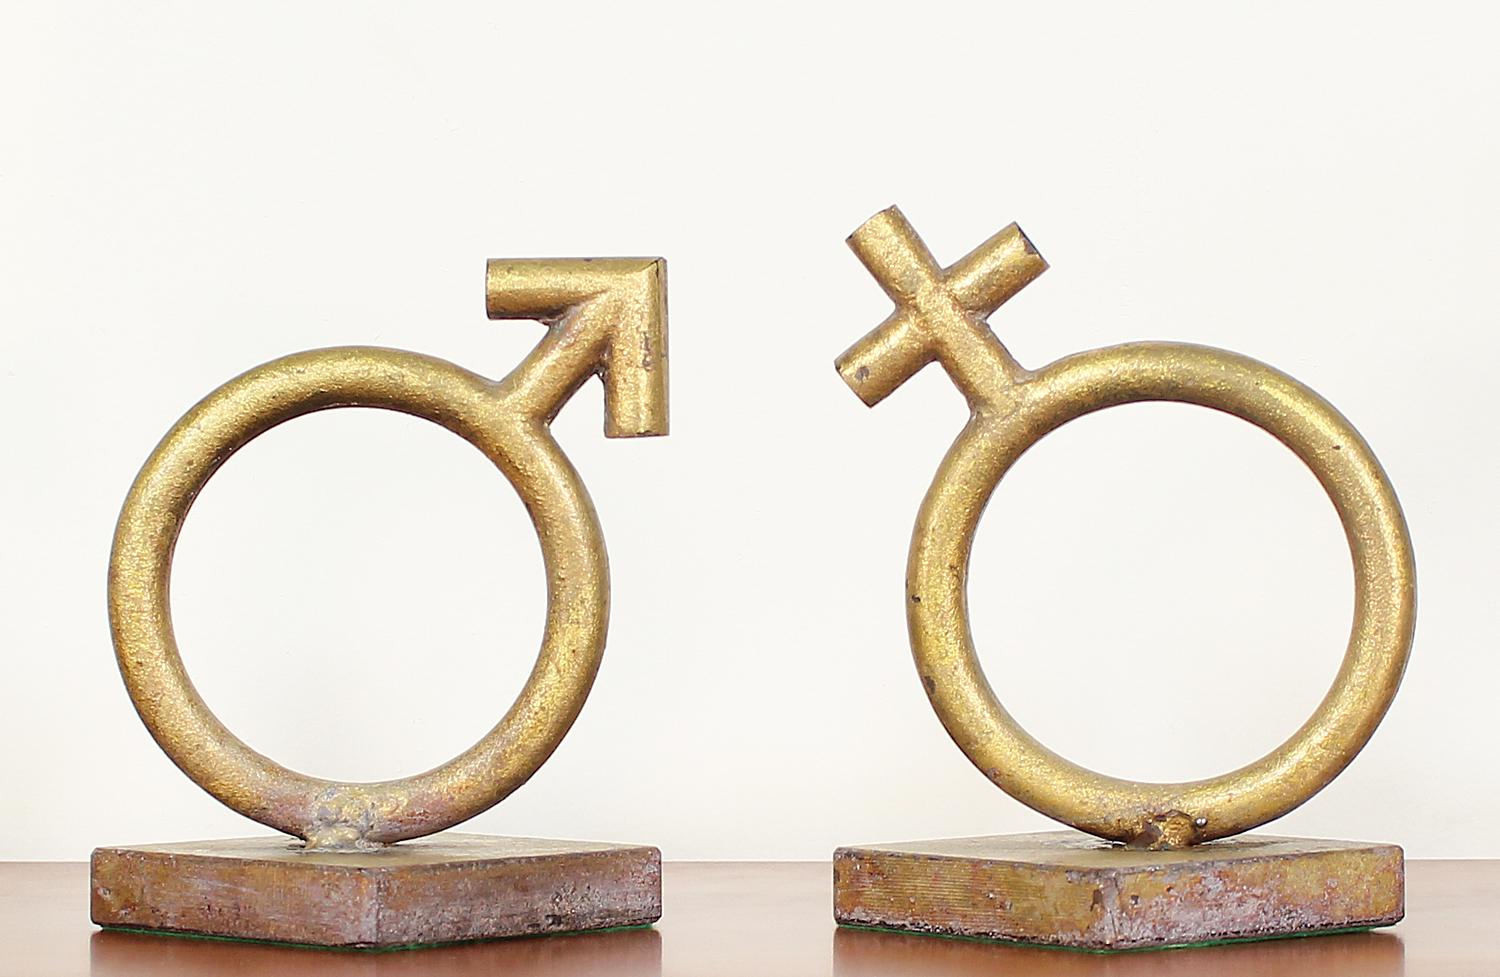 Sex Symbol bookends designed by Curtis Jere for Artisan House in the United States circa 1970’s. This beautiful set of bookends is made with heavy gold leaf metal in its original condition, showing wear from age and use. Both signs display a vintage